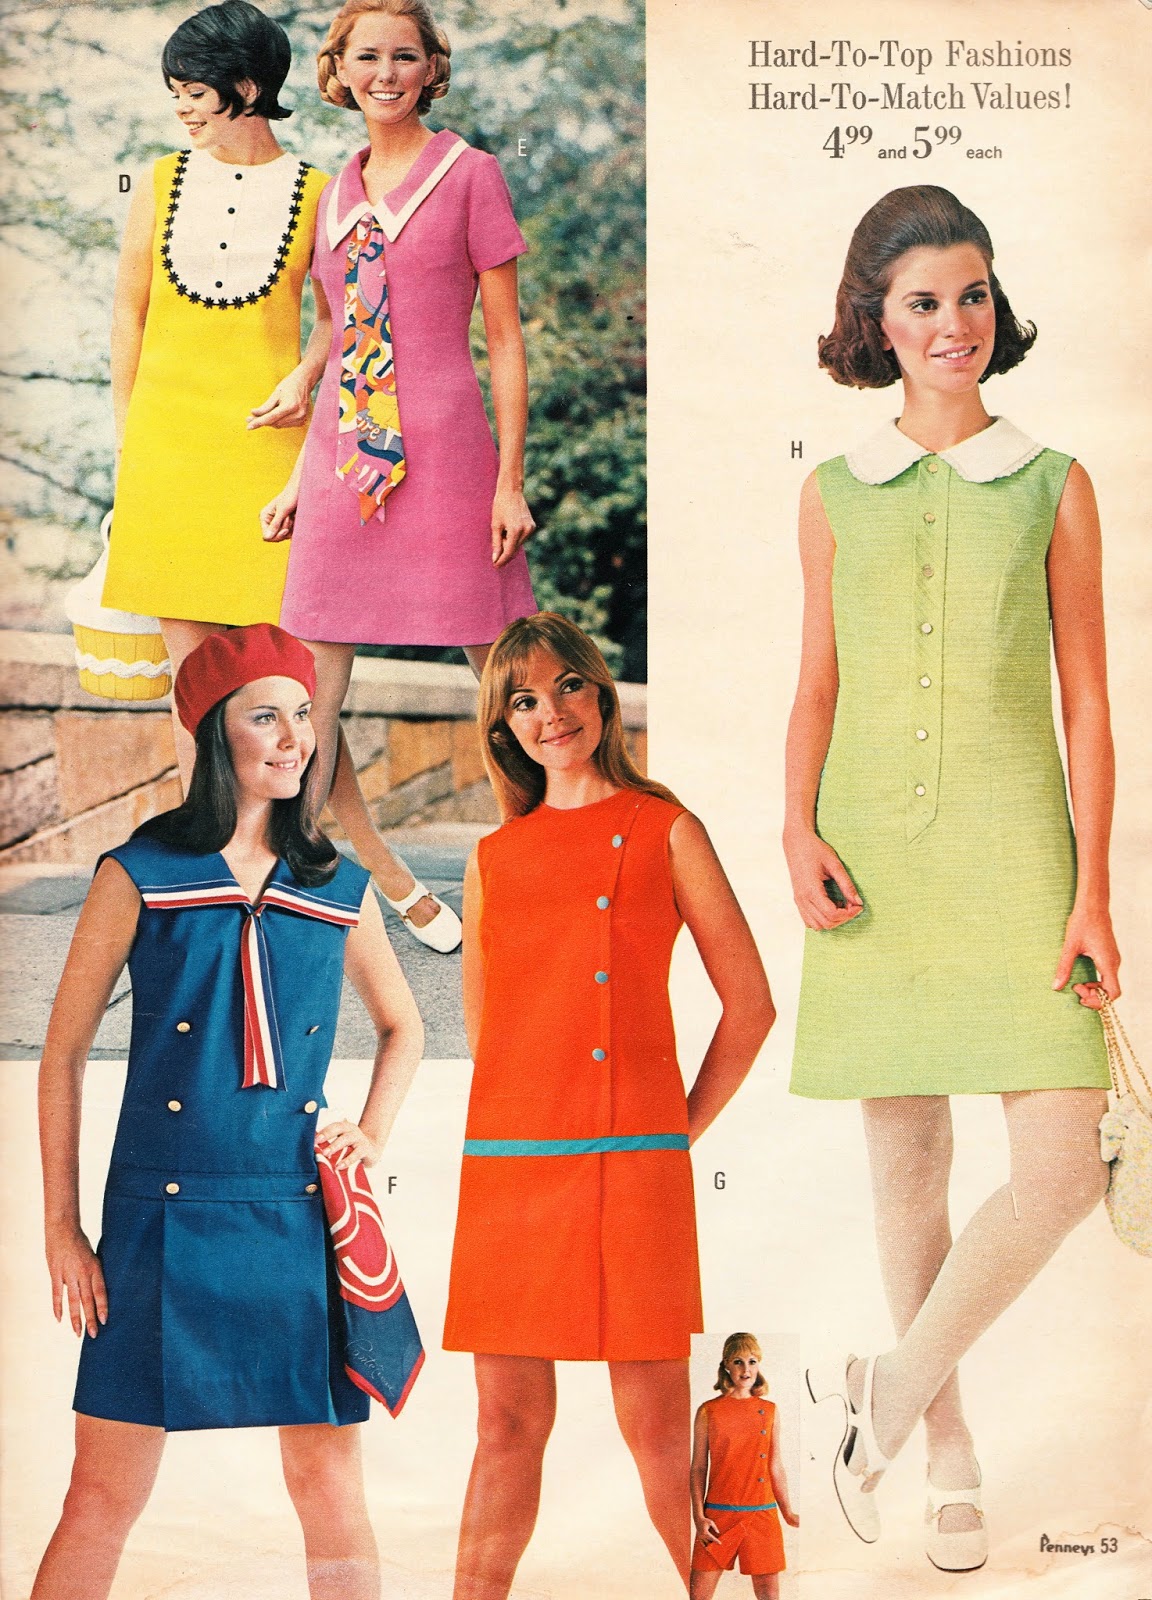 Kathy Loghry Blogspot: Random Goodness - Spring Dresses and Such!